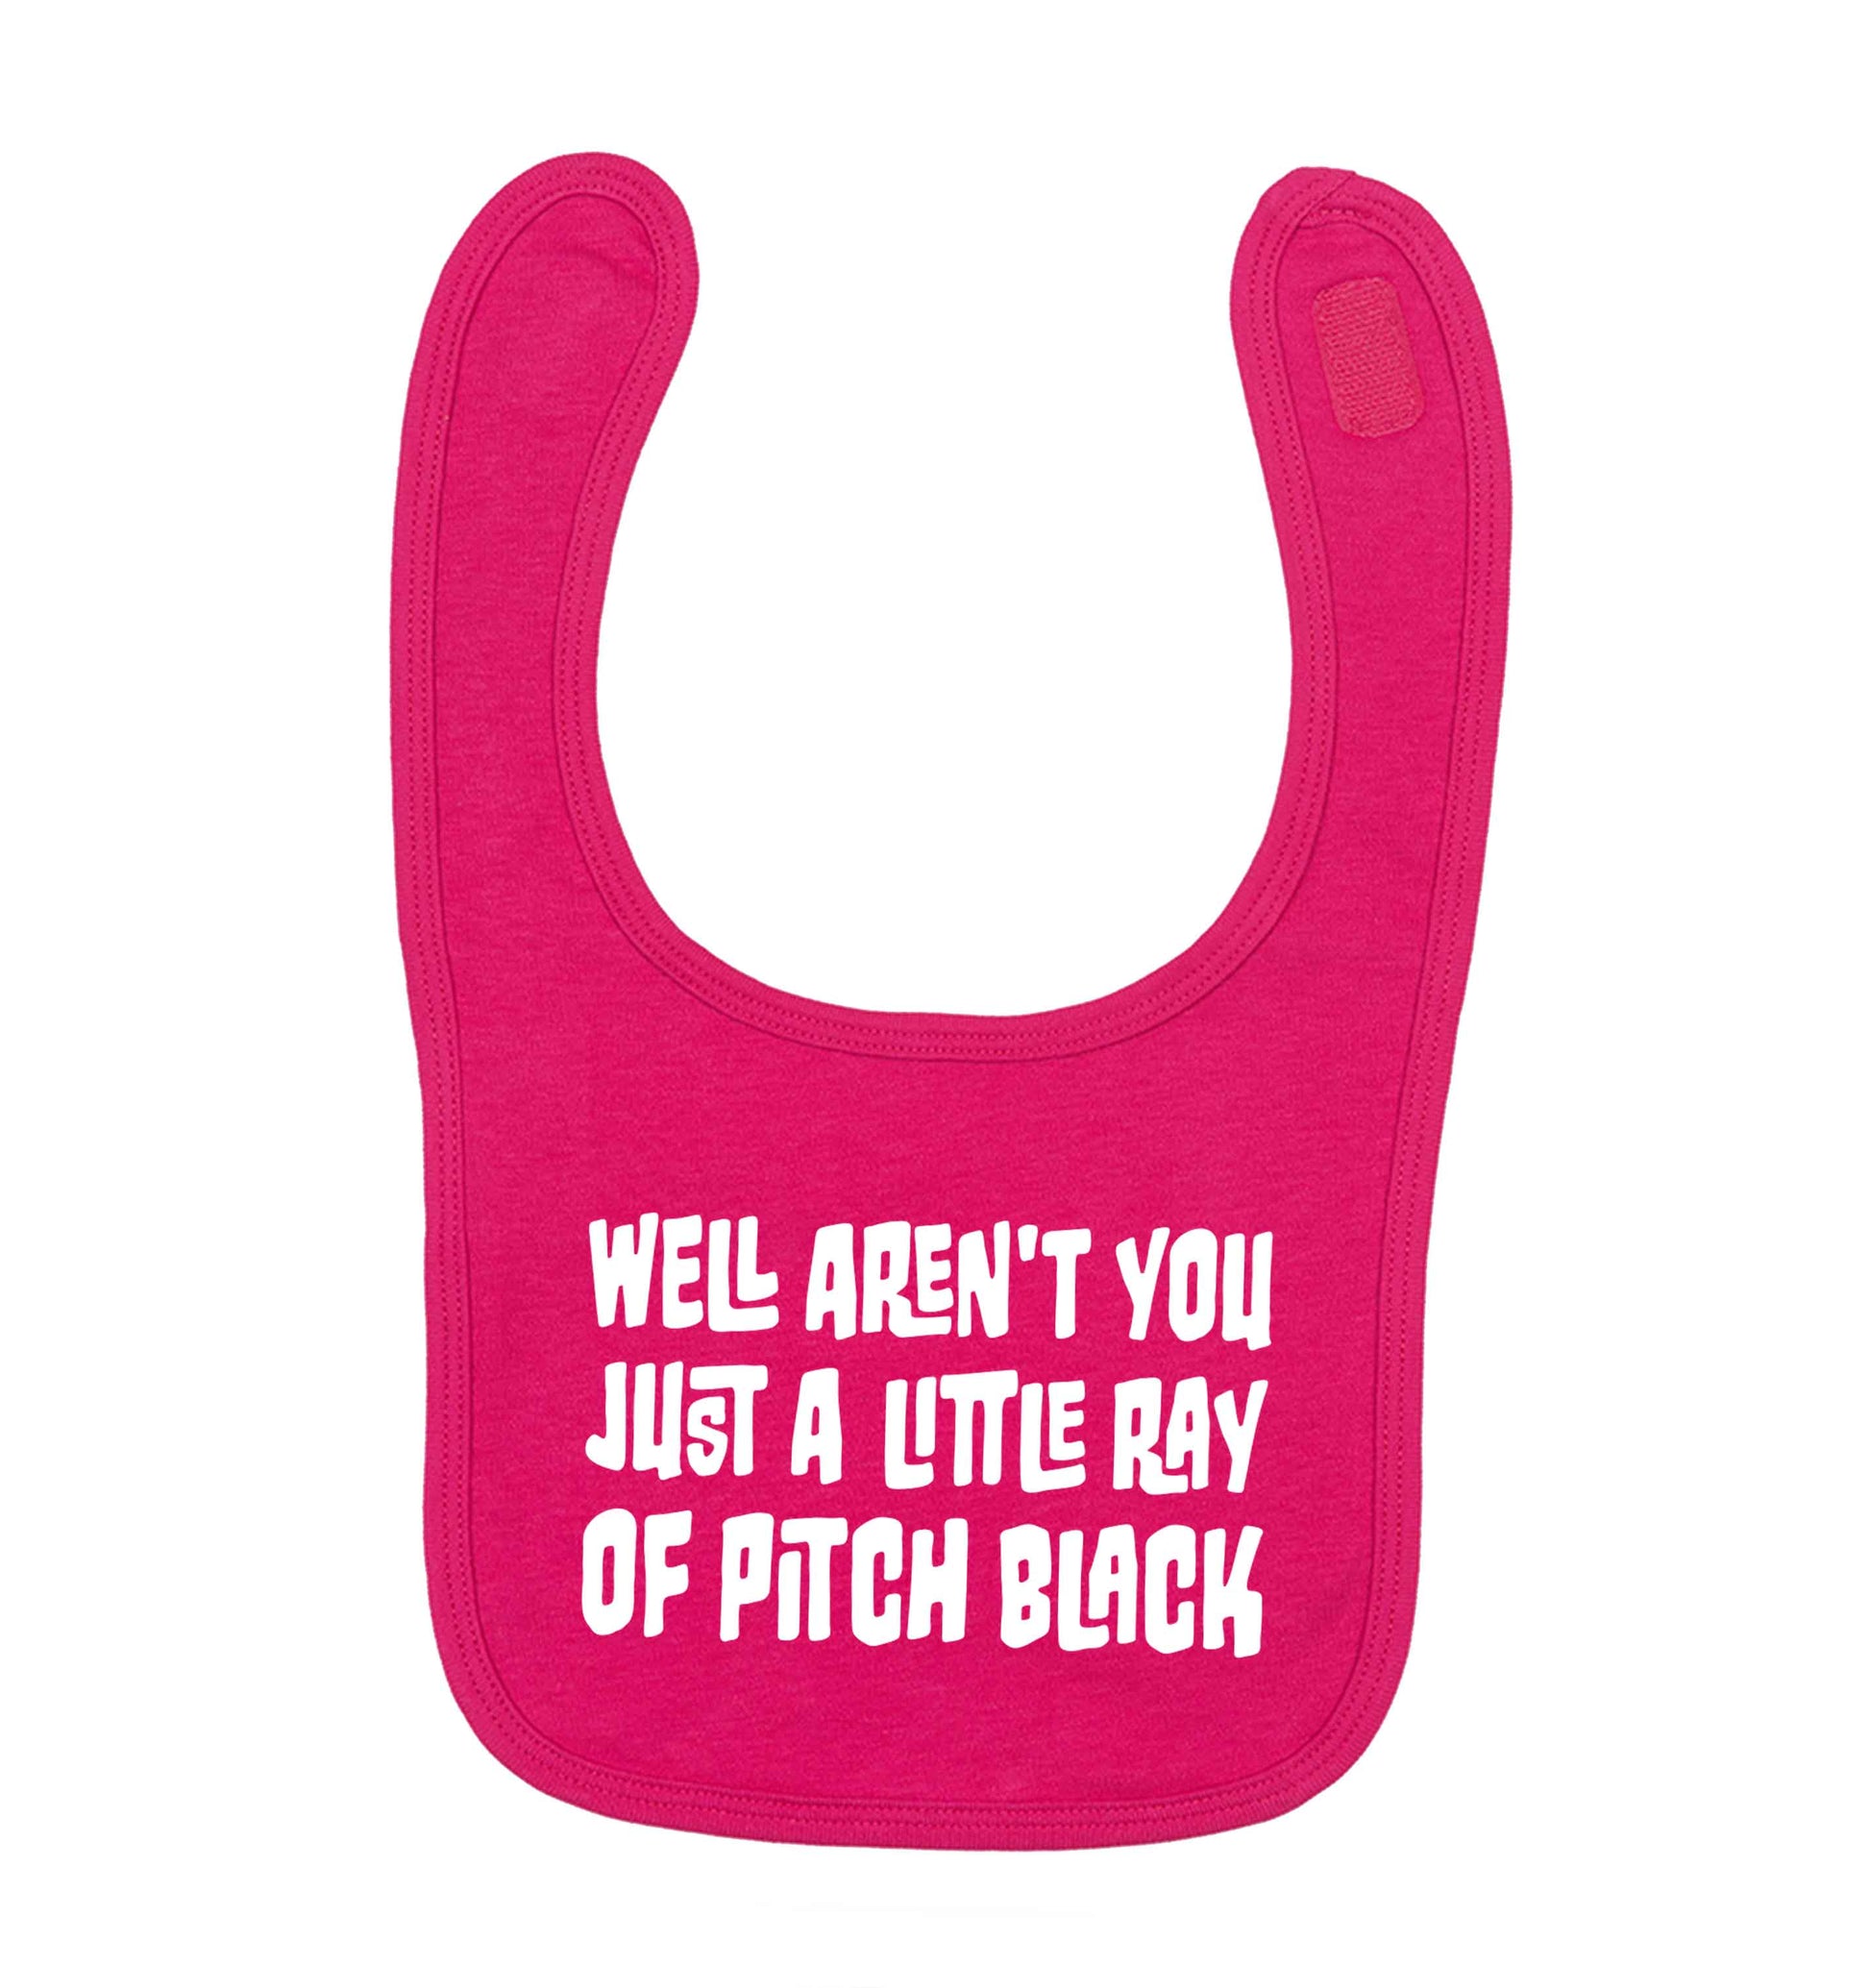 Well aren't you just a little ray of pitch black Kit dark pink baby bib